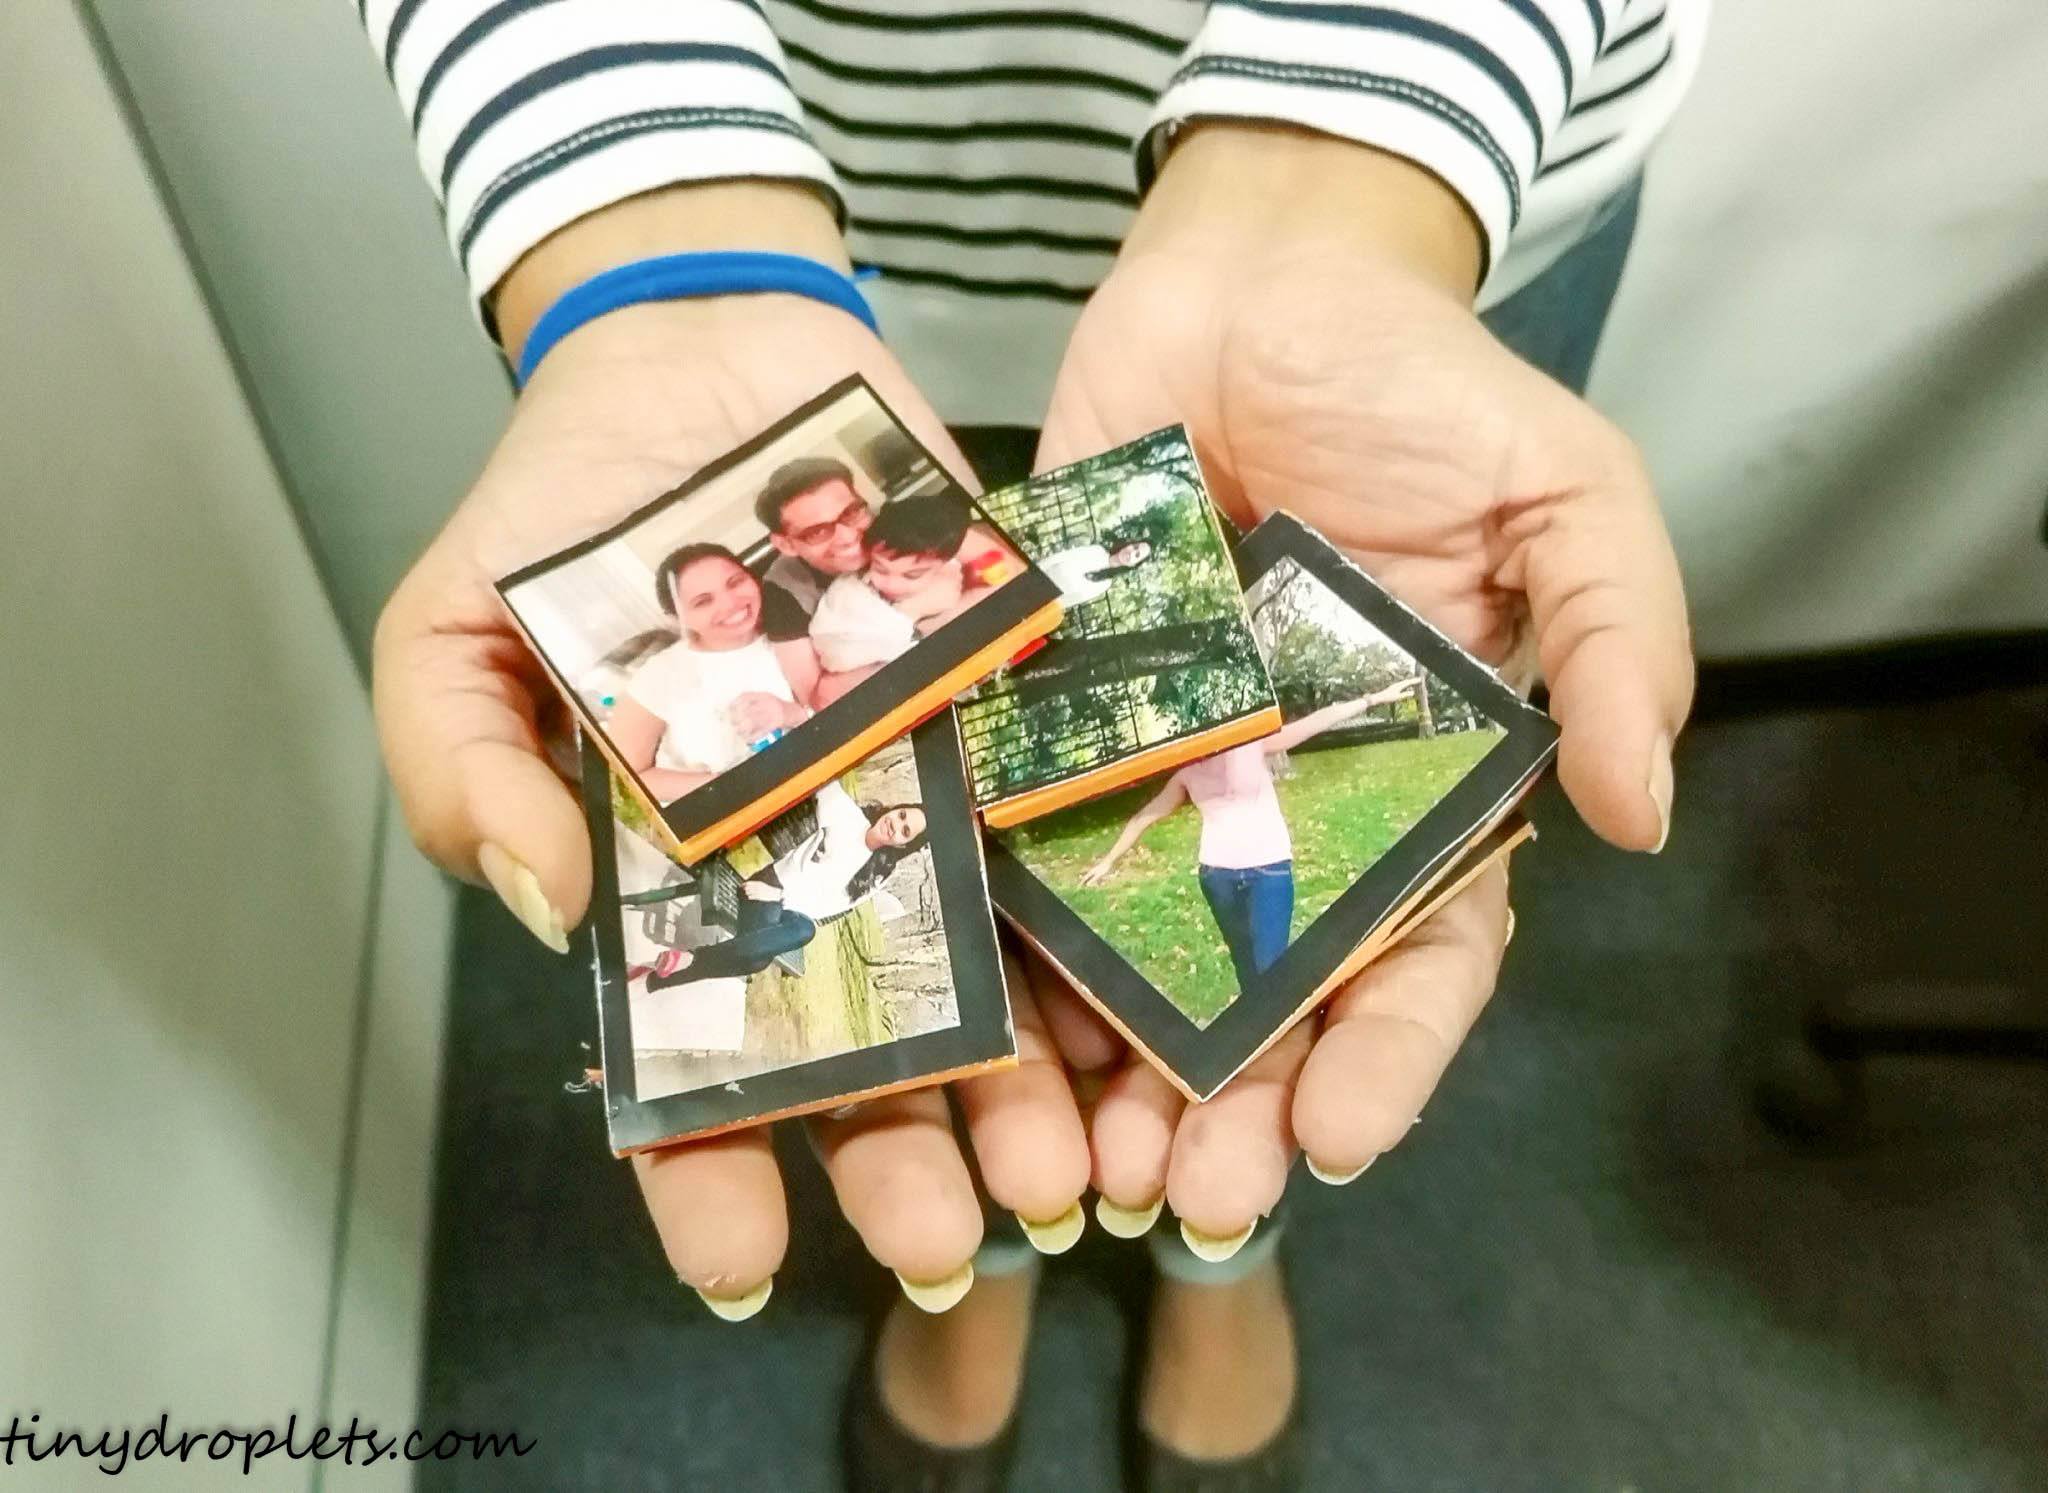 How to Make Photo Magnets: An Easy & Inexpensive DIY!